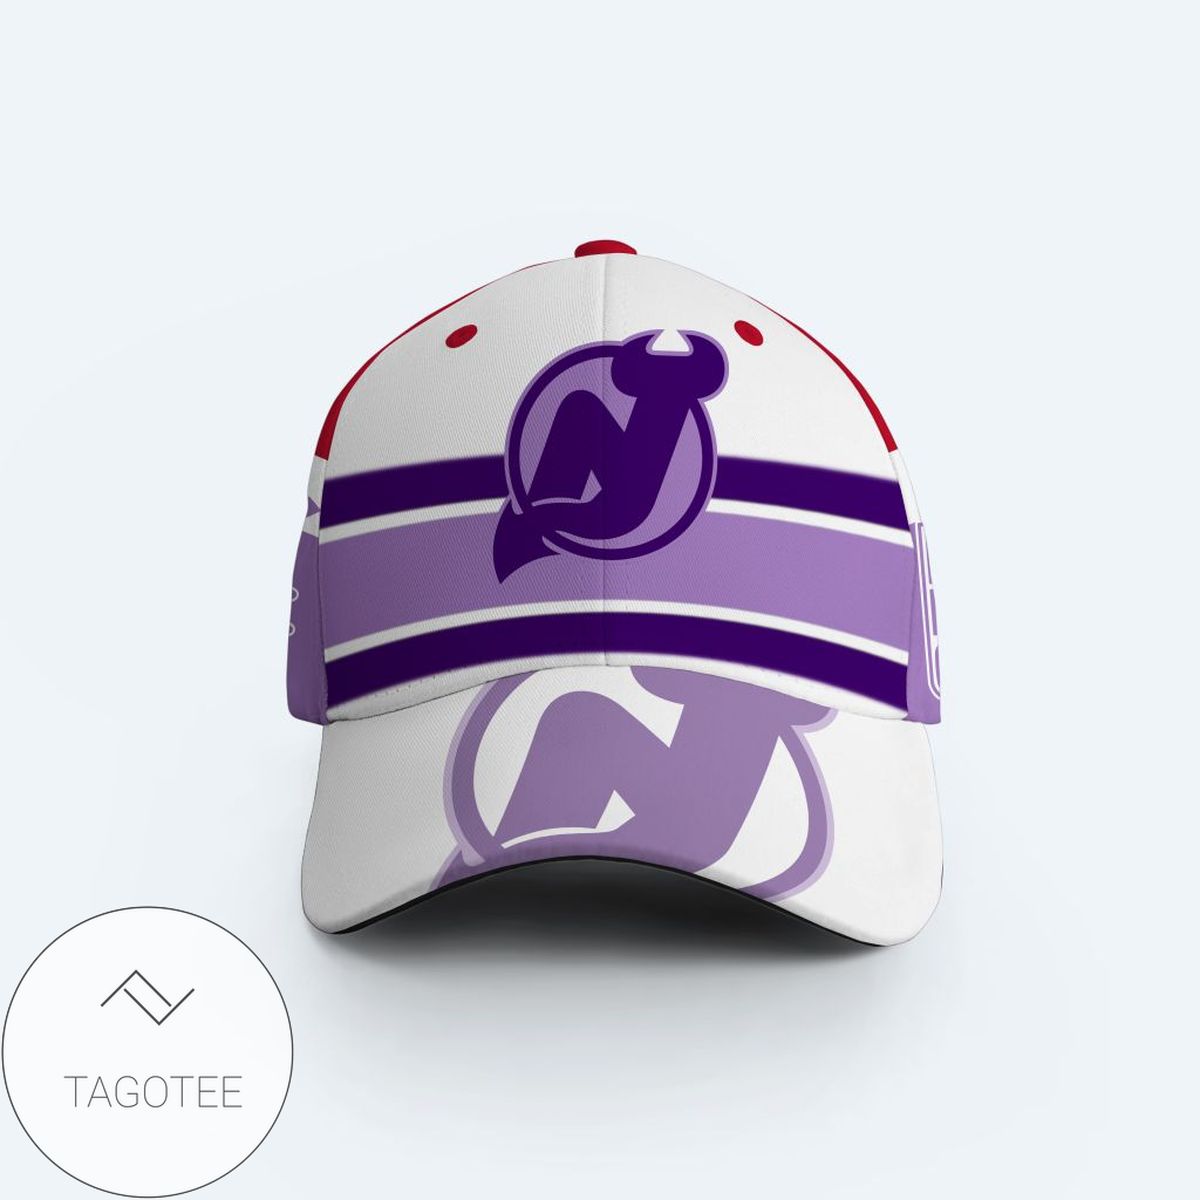 NHL New Jersey Devils Fights Cancer Cap